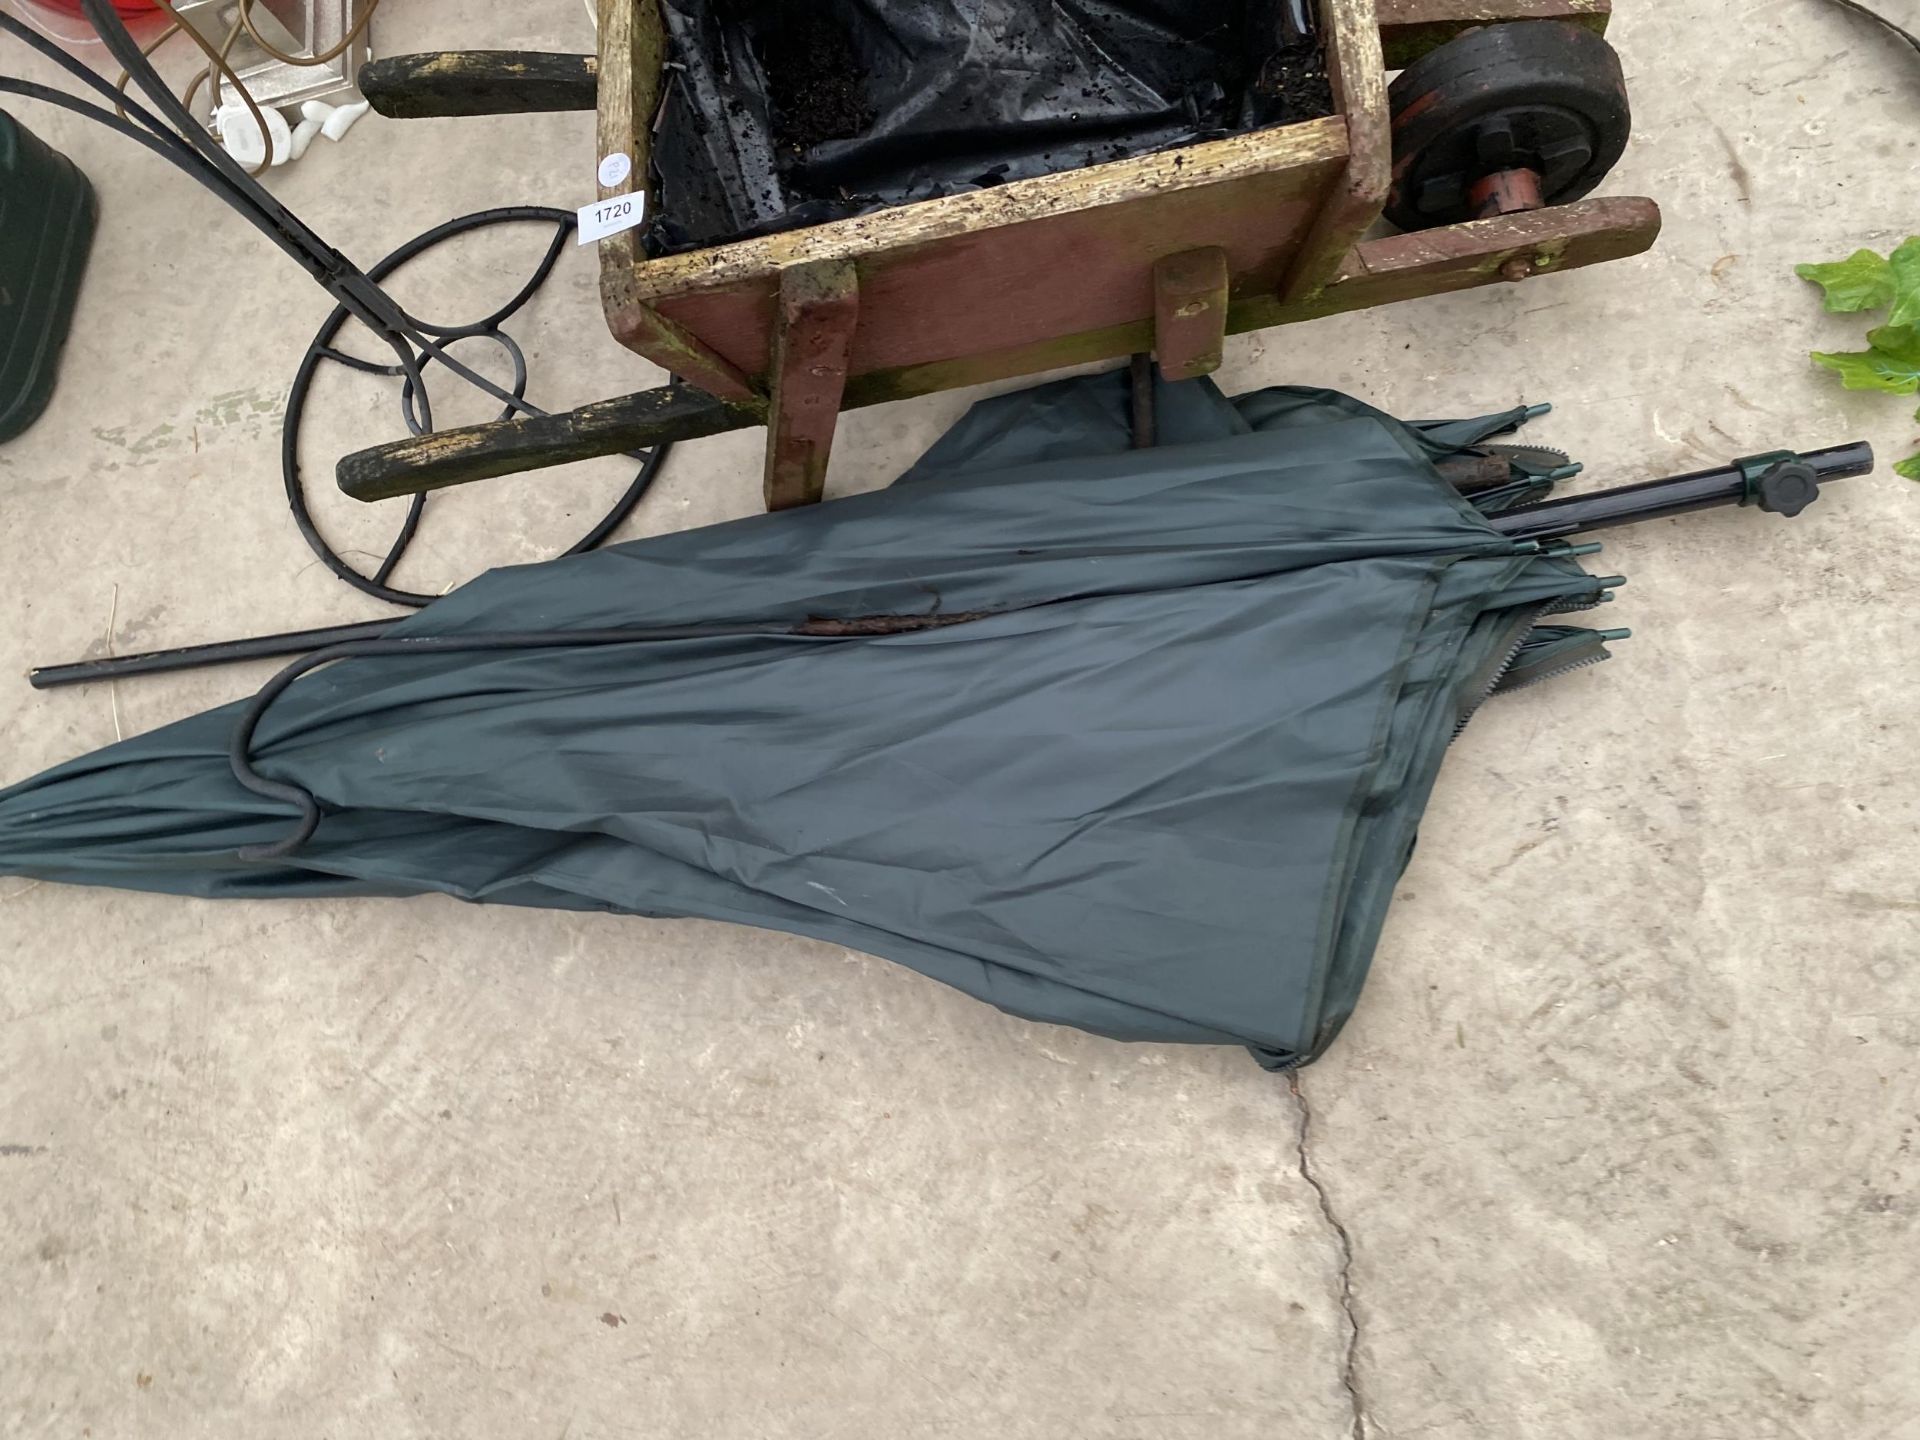 A WOODEN WHEEL BARROW PLANTER, A WROUGHT IRON PLANTER AND A FISHING BROLLY - Image 3 of 5